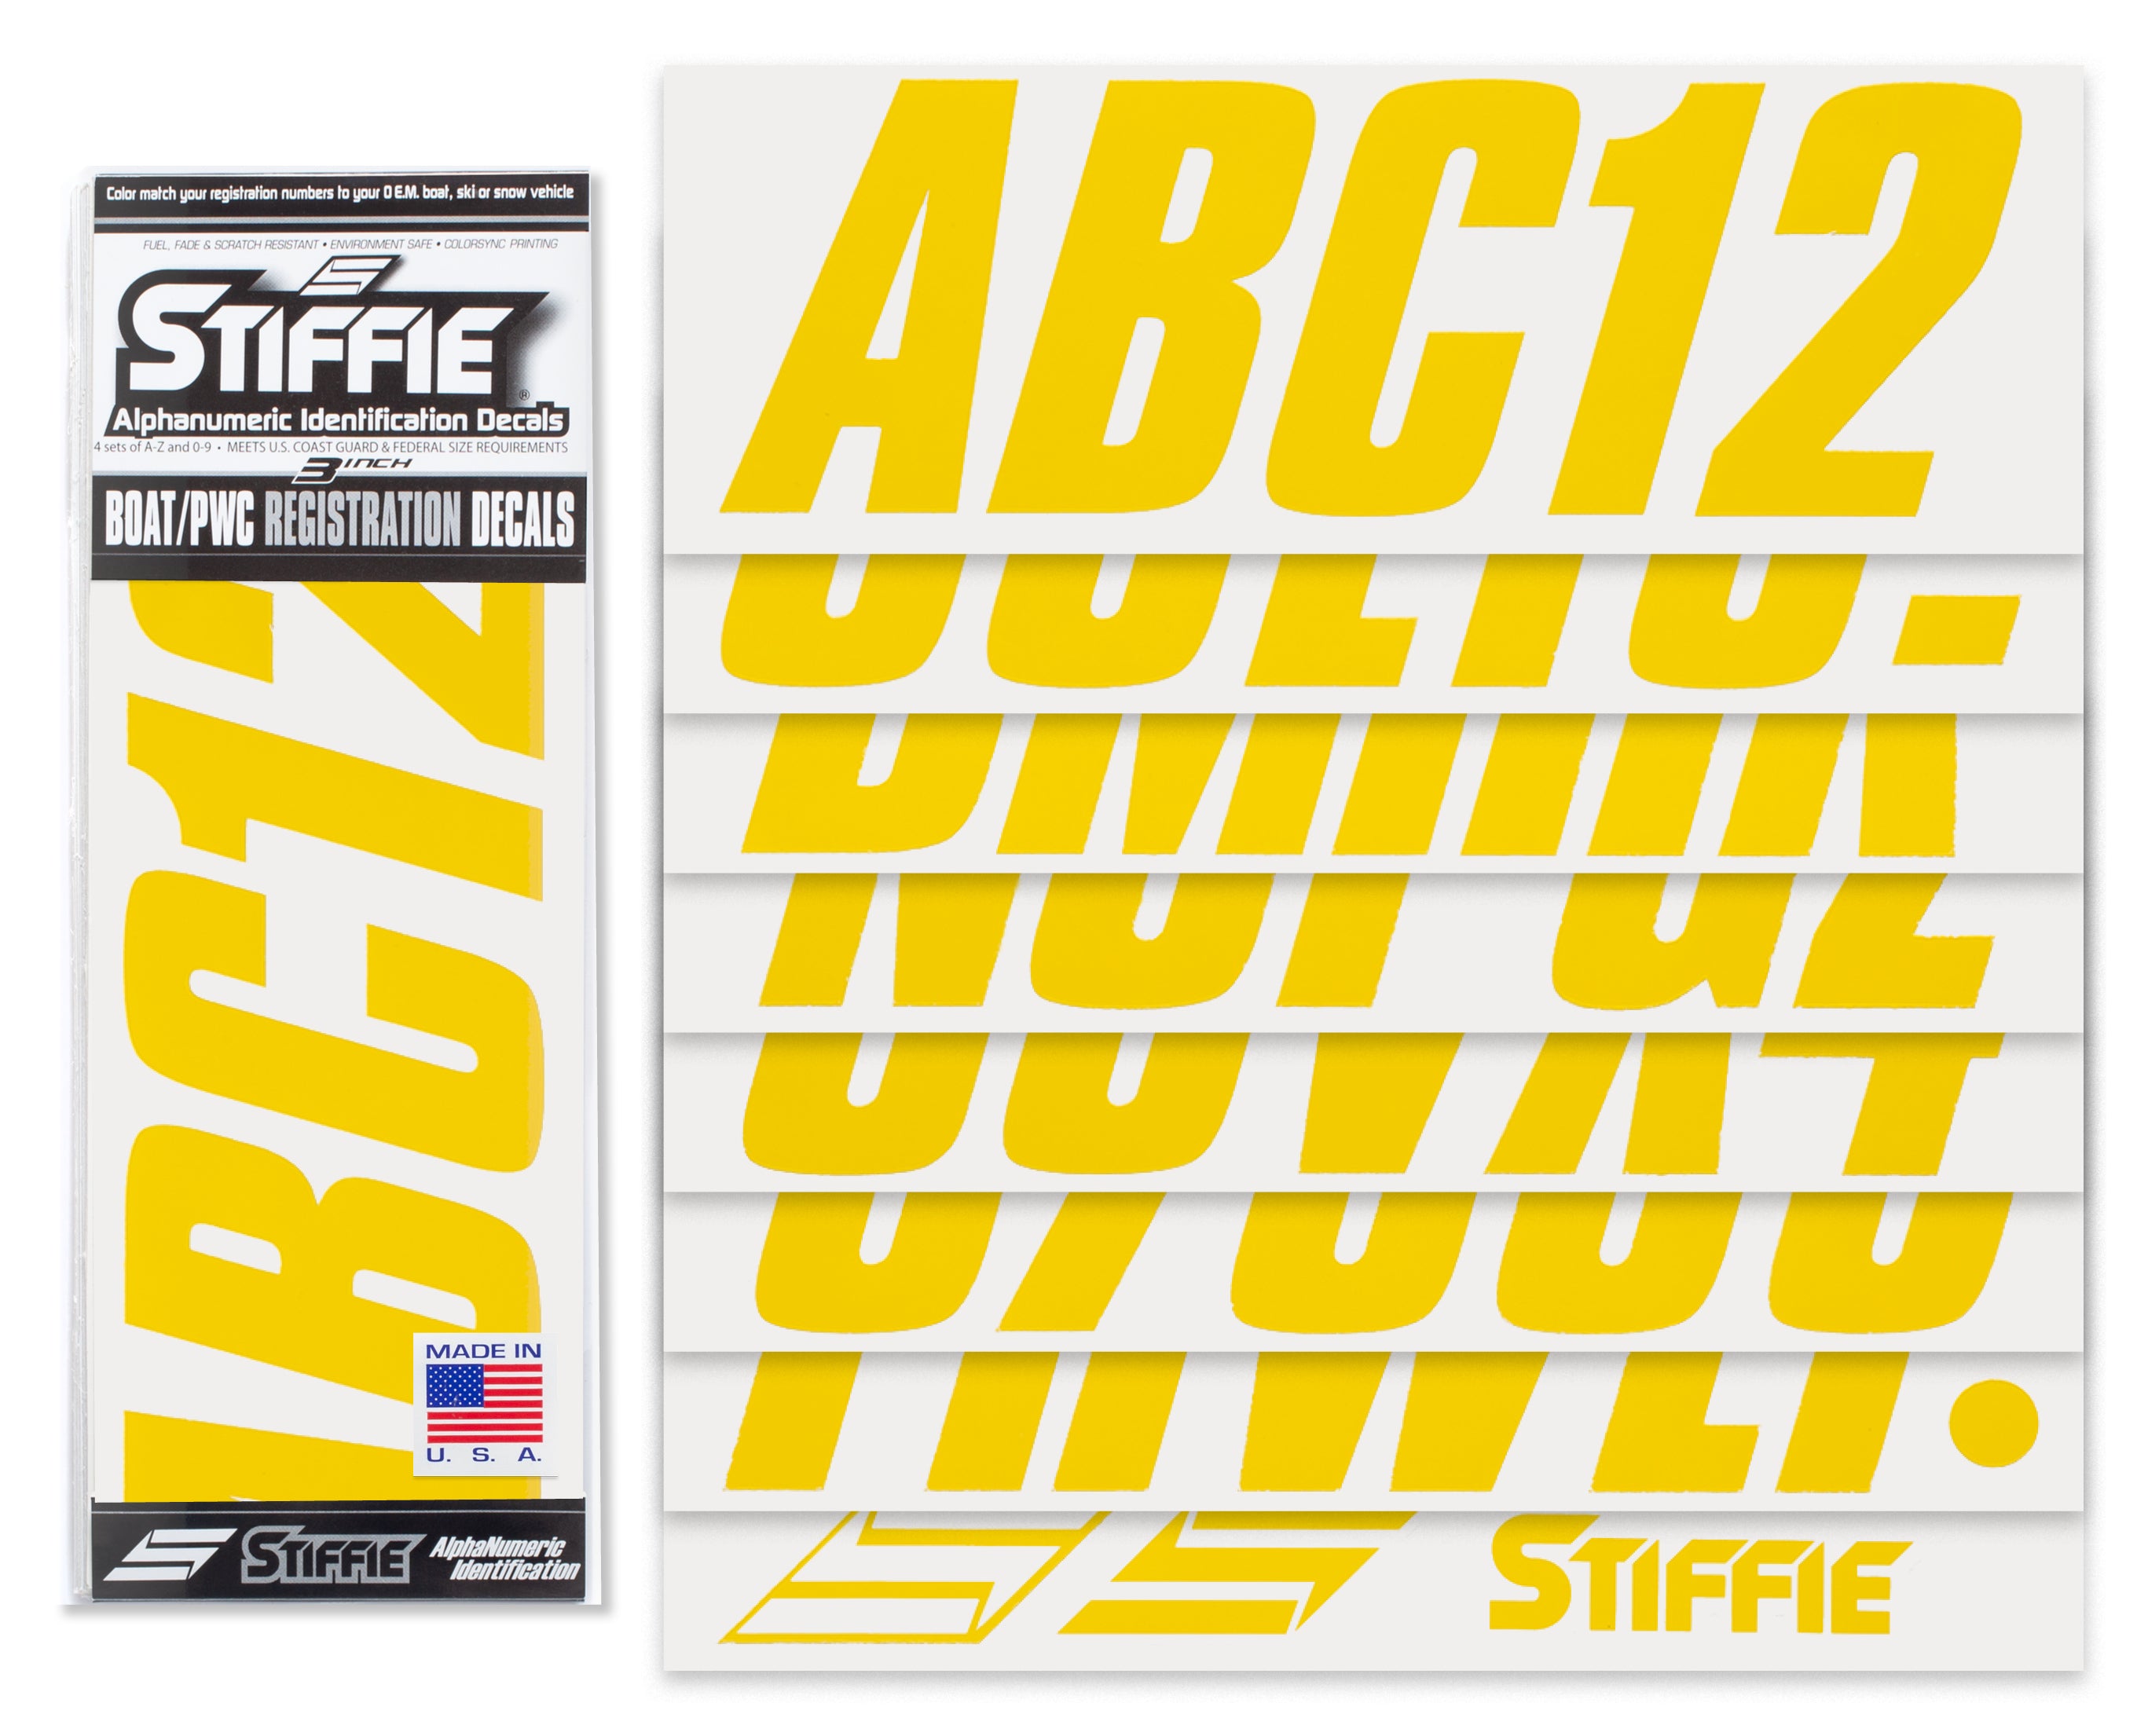 STIFFIE Shift Yellow 3" ID Kit Alpha-Numeric Registration Identification Numbers Stickers Decals for Boats & Personal Watercraft